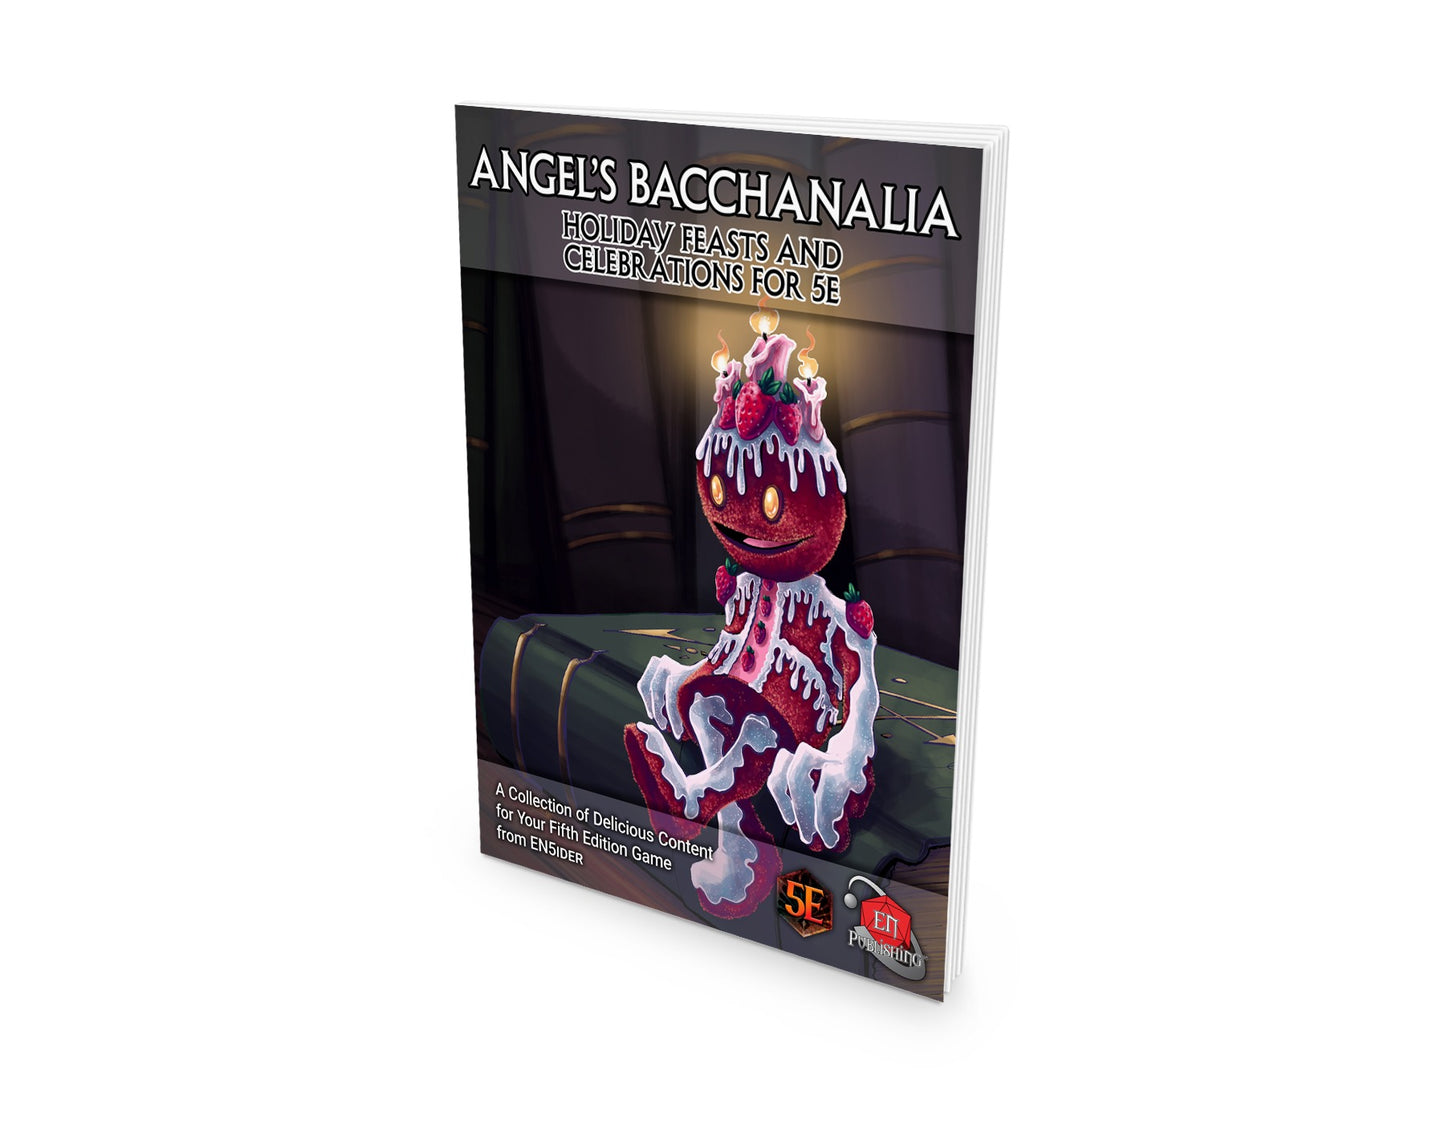 Angel's Bacchanalia: Holiday Feasts & Celebrations for D&D